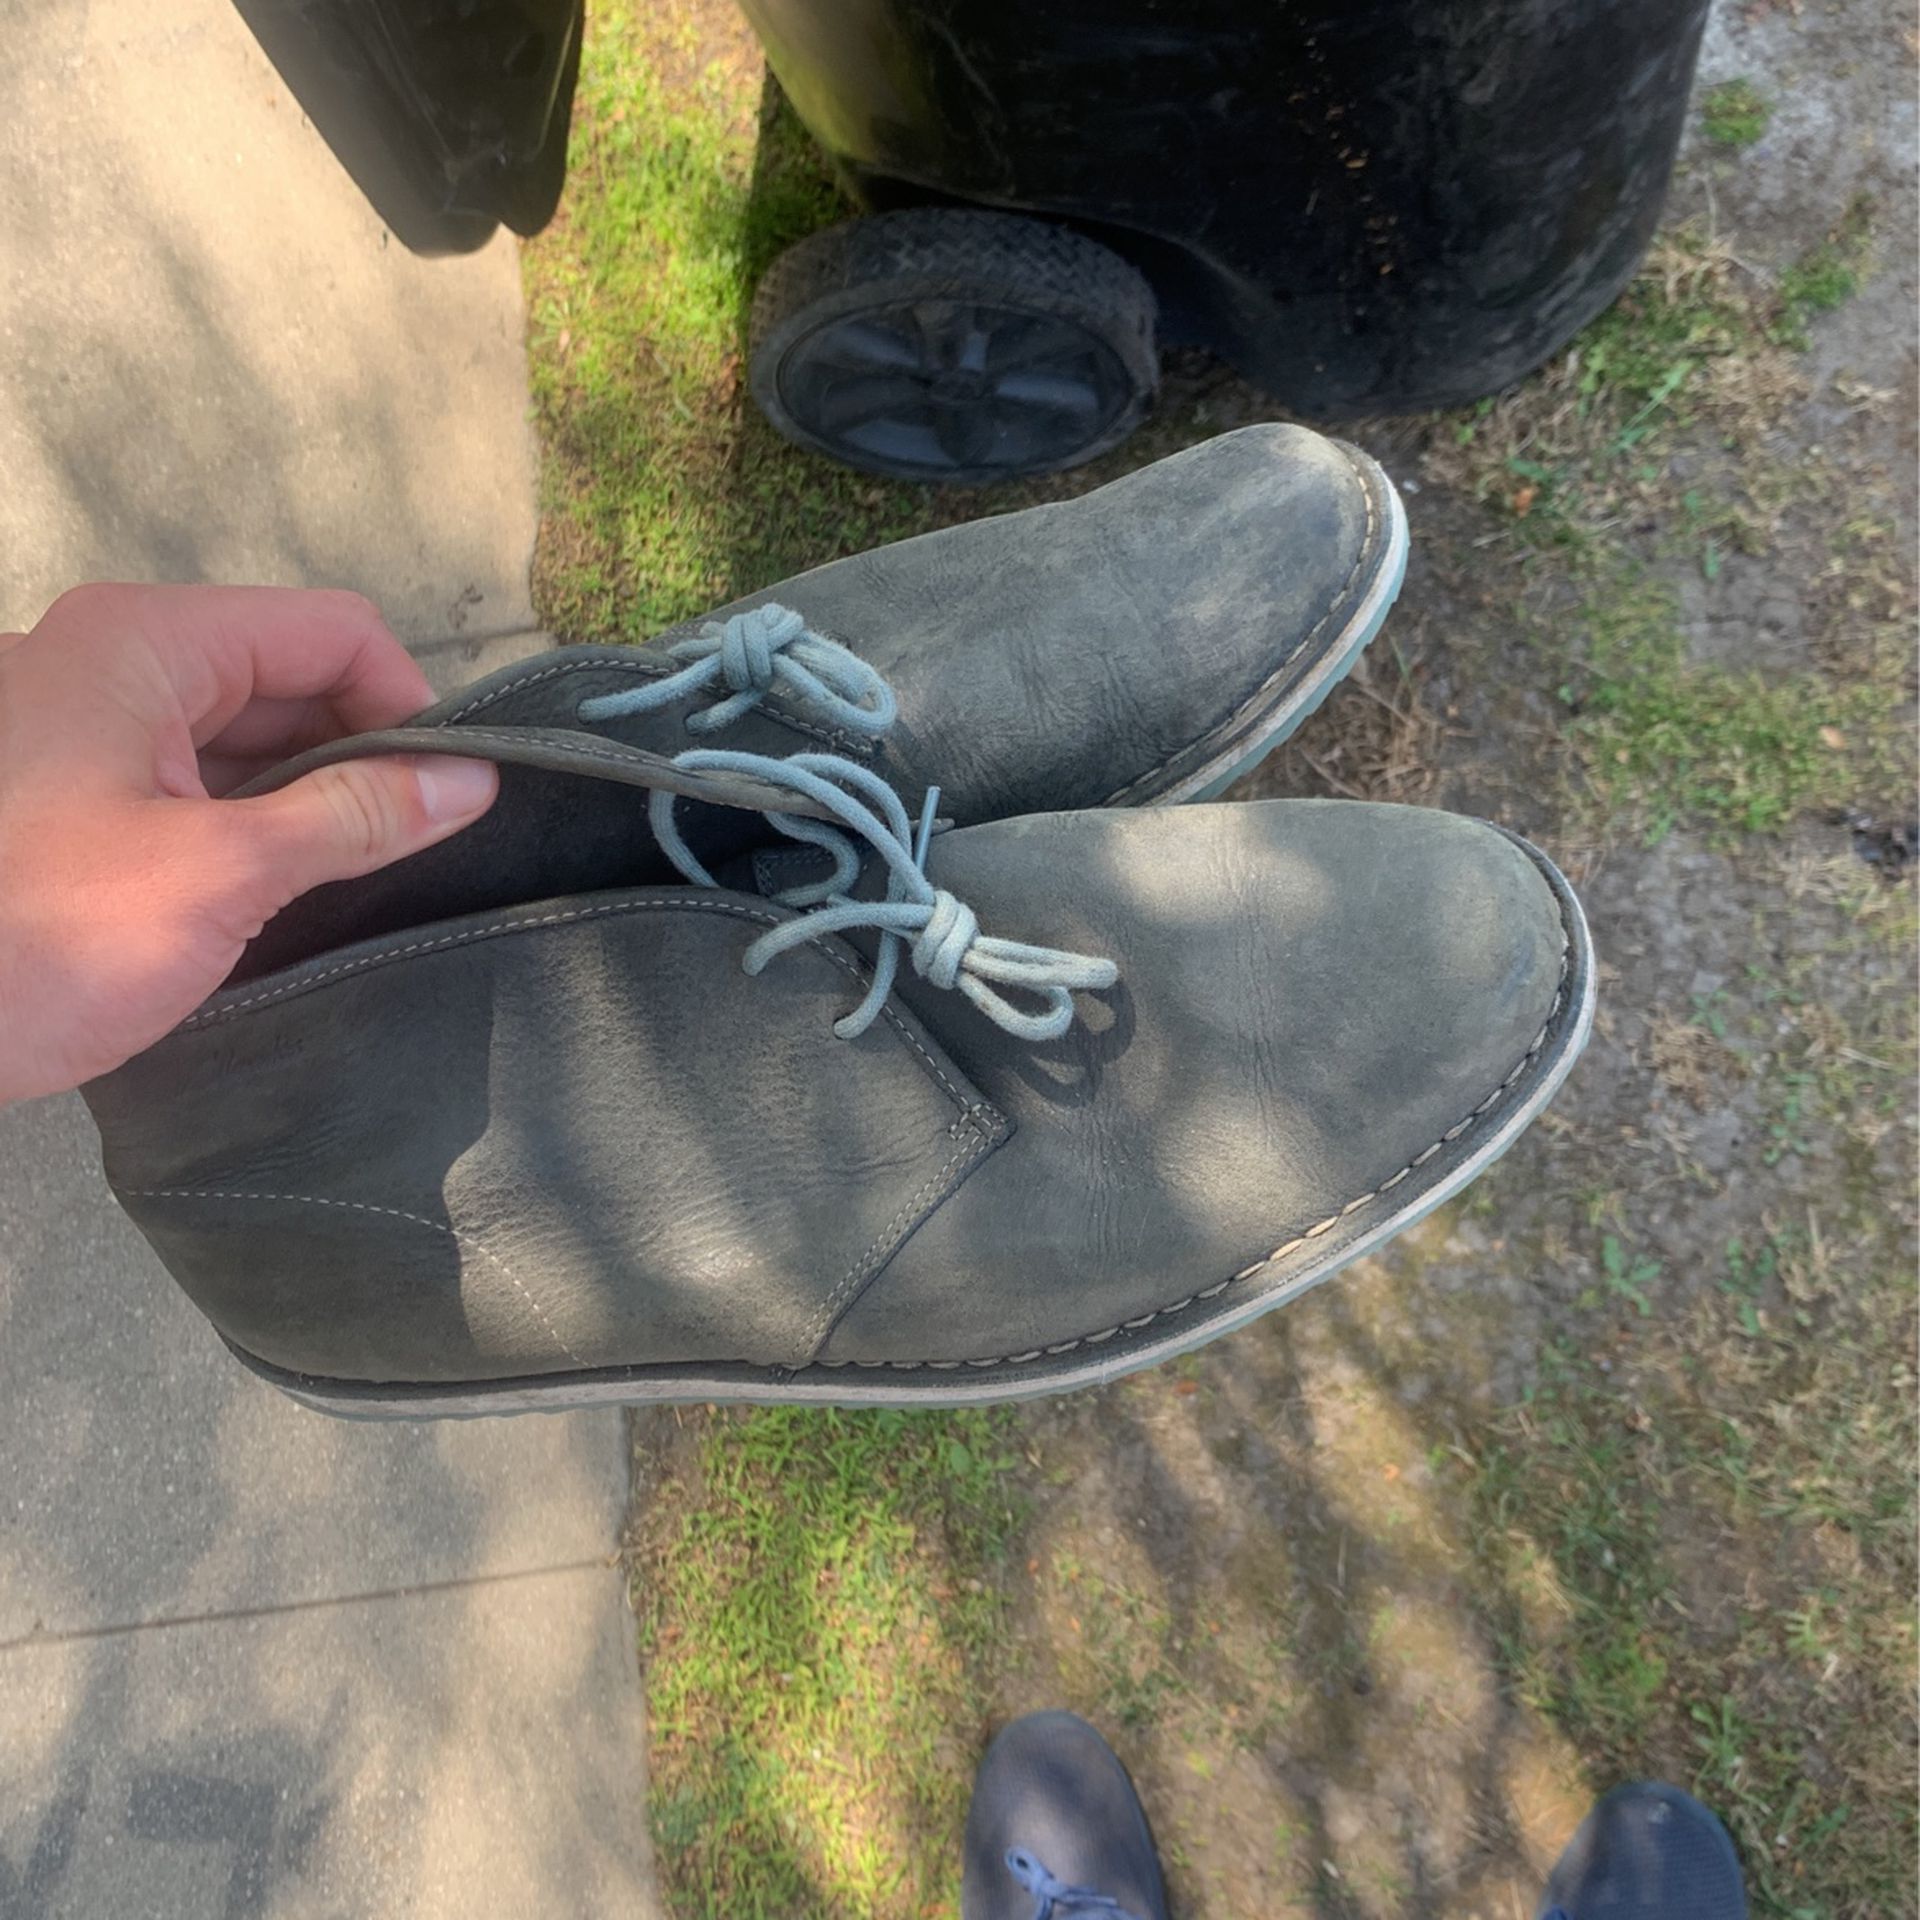 Clarks Desert Boots Size 10.5 for Angeles, CA - OfferUp